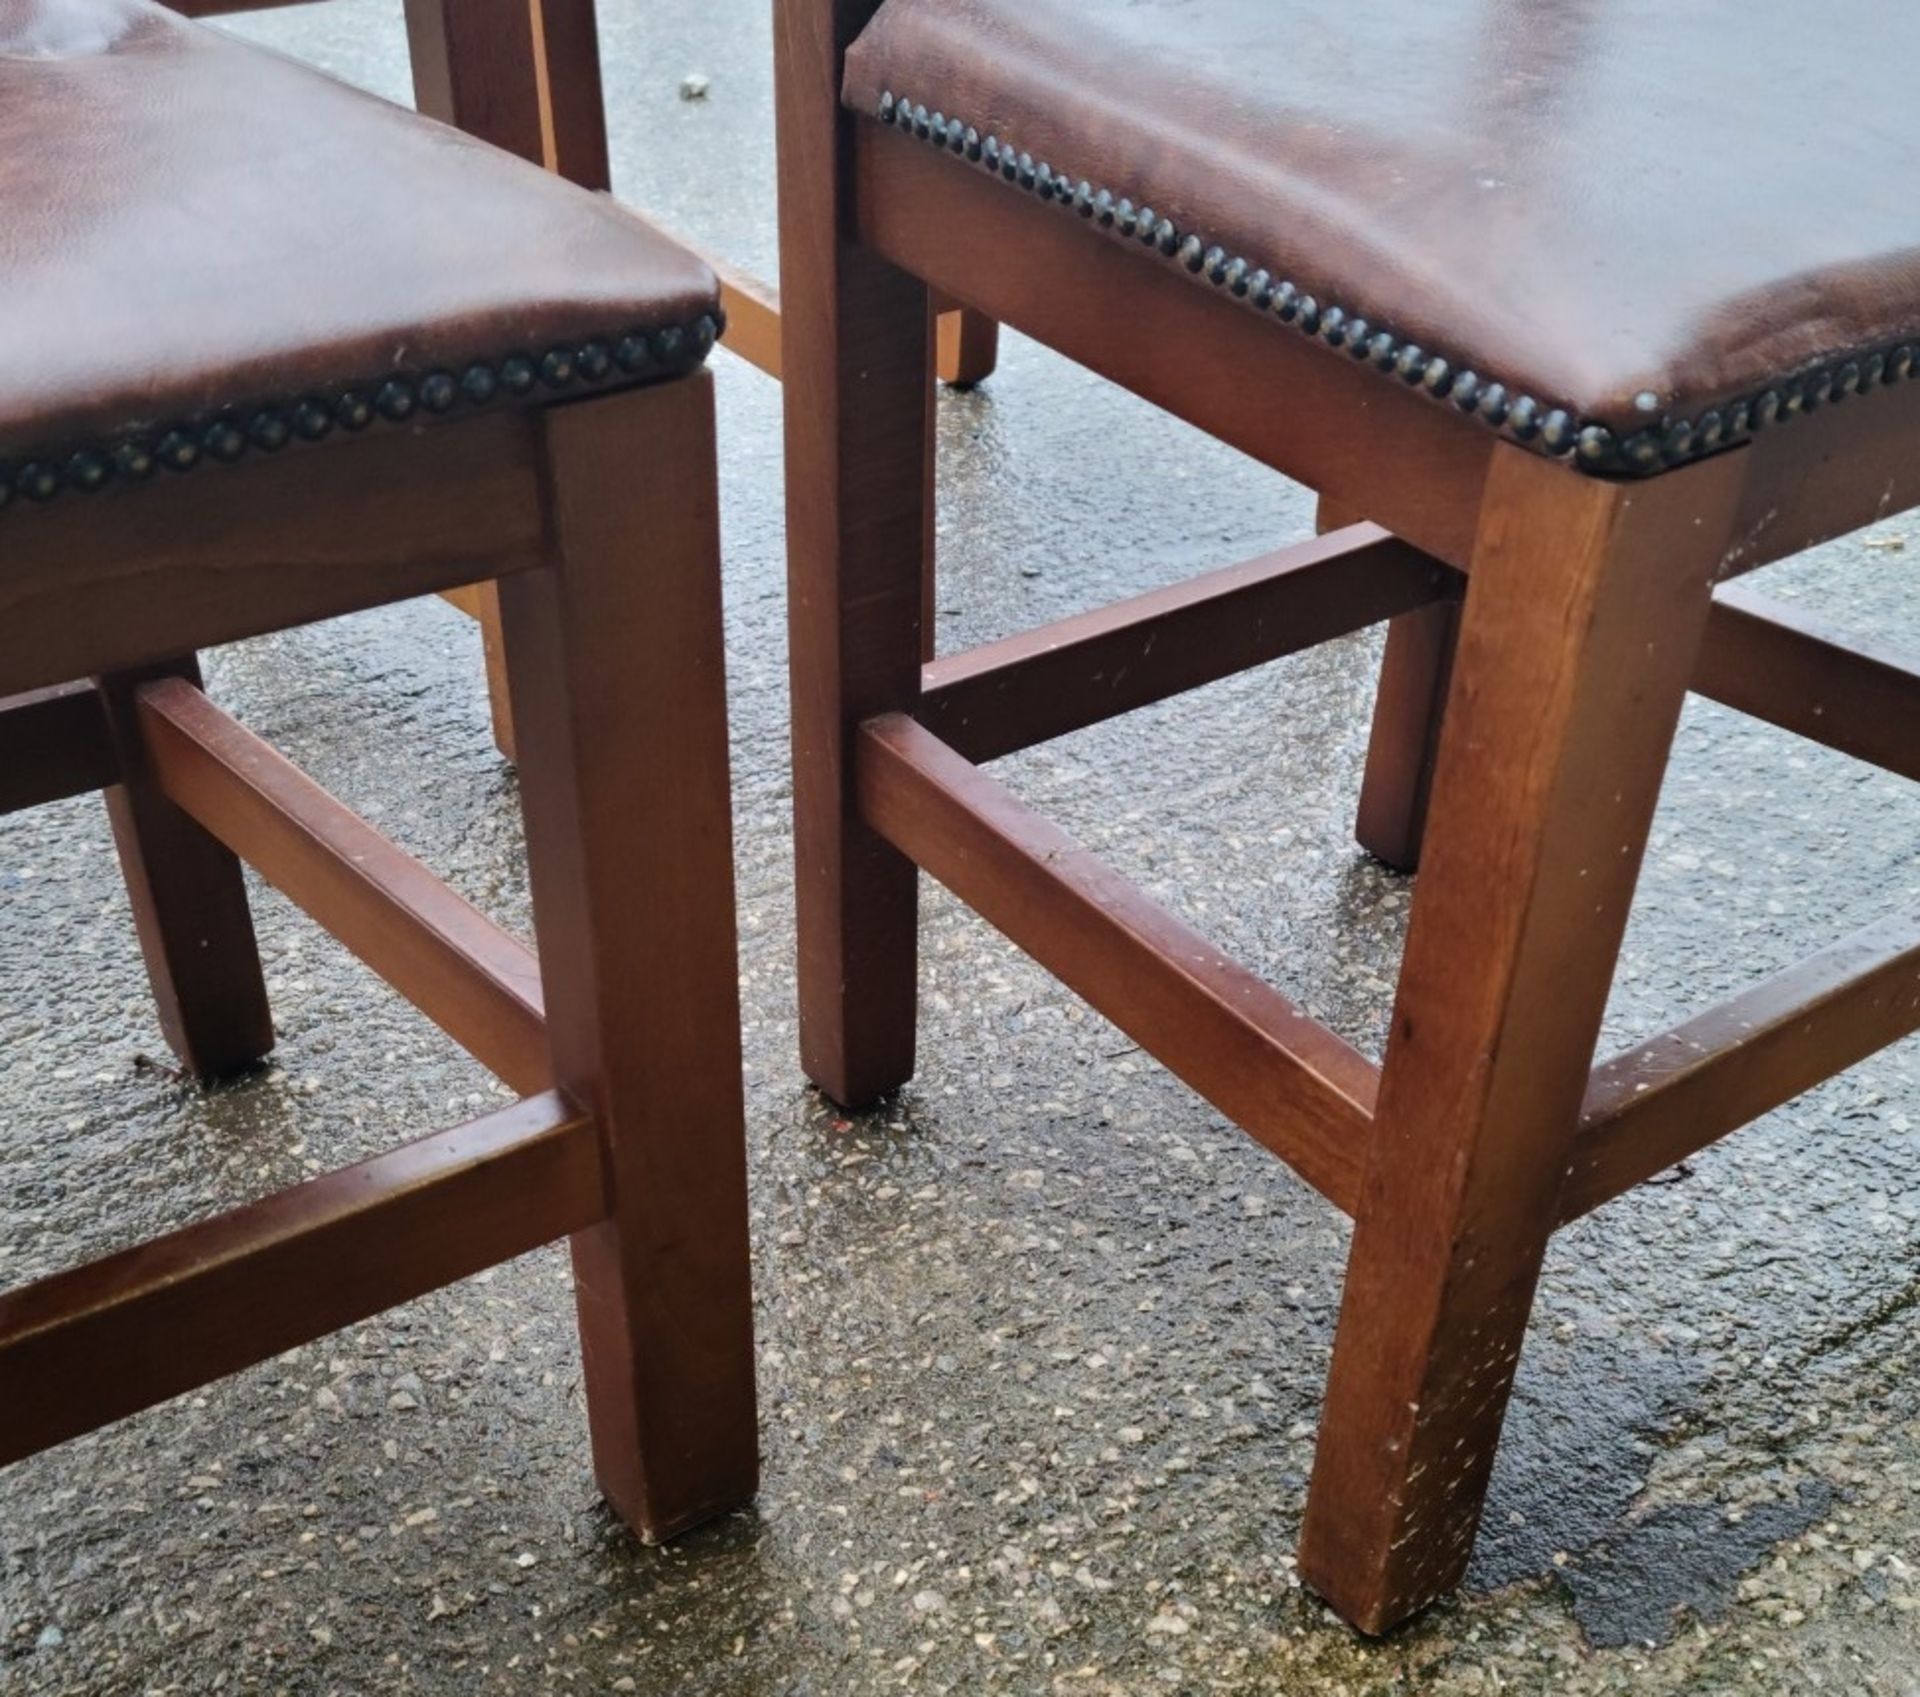 Set Of 4 x Aztec Print Dining Chairs With Faux Brown Leather Seating & Studded Seams - Image 2 of 5